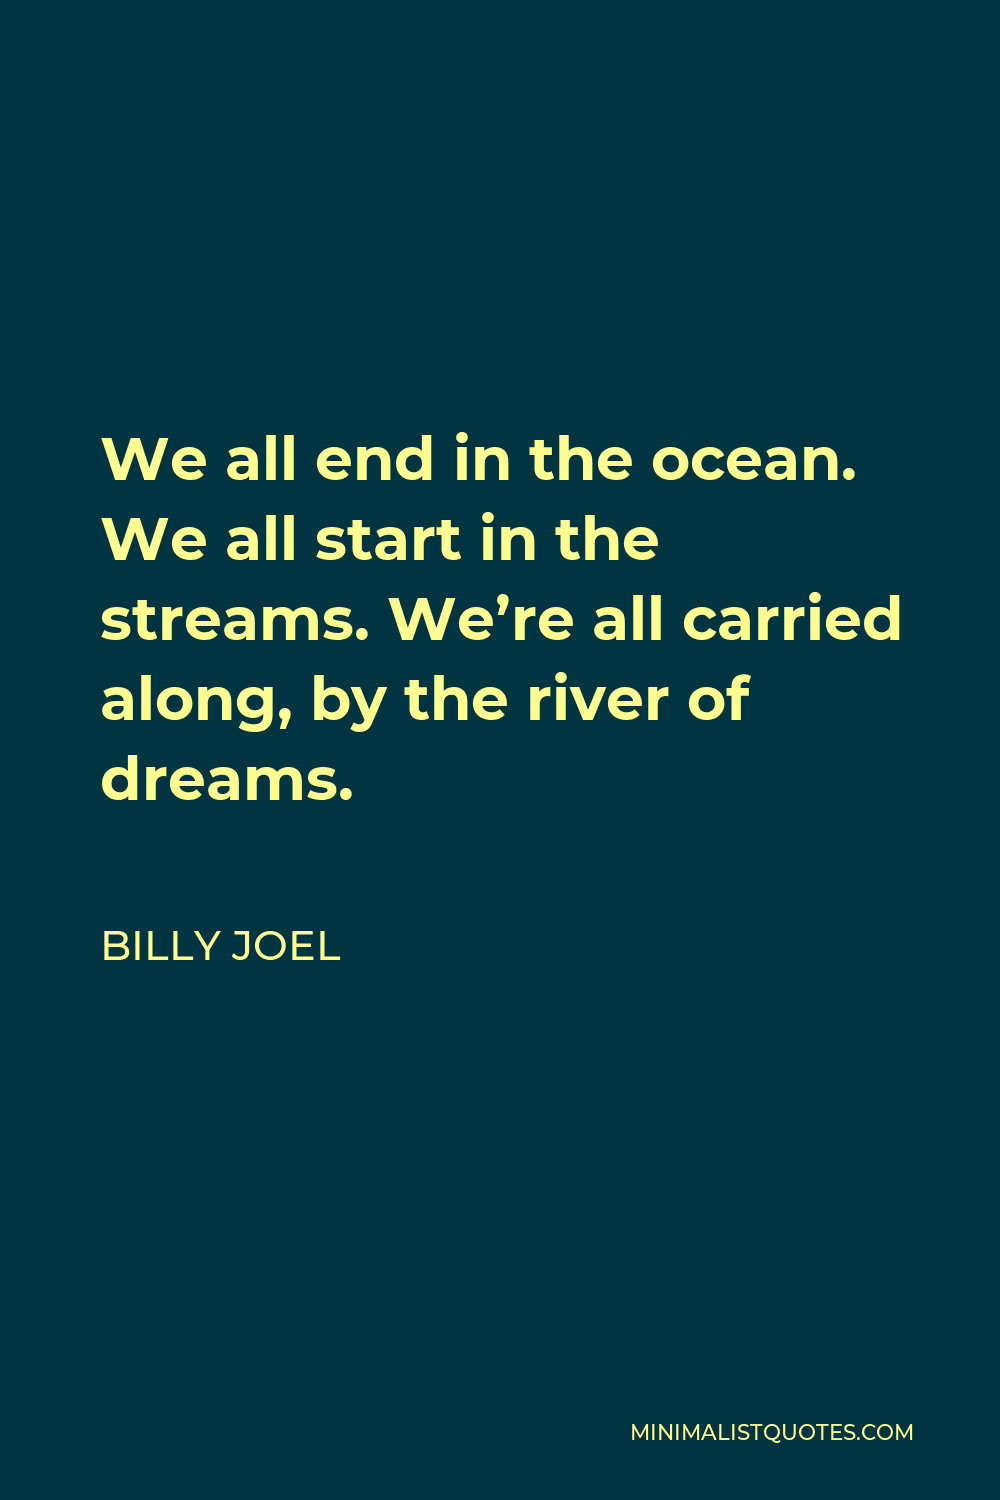 Billy Joel Quote - We all end in the ocean. We all start in the streams. We’re all carried along, by the river of dreams.